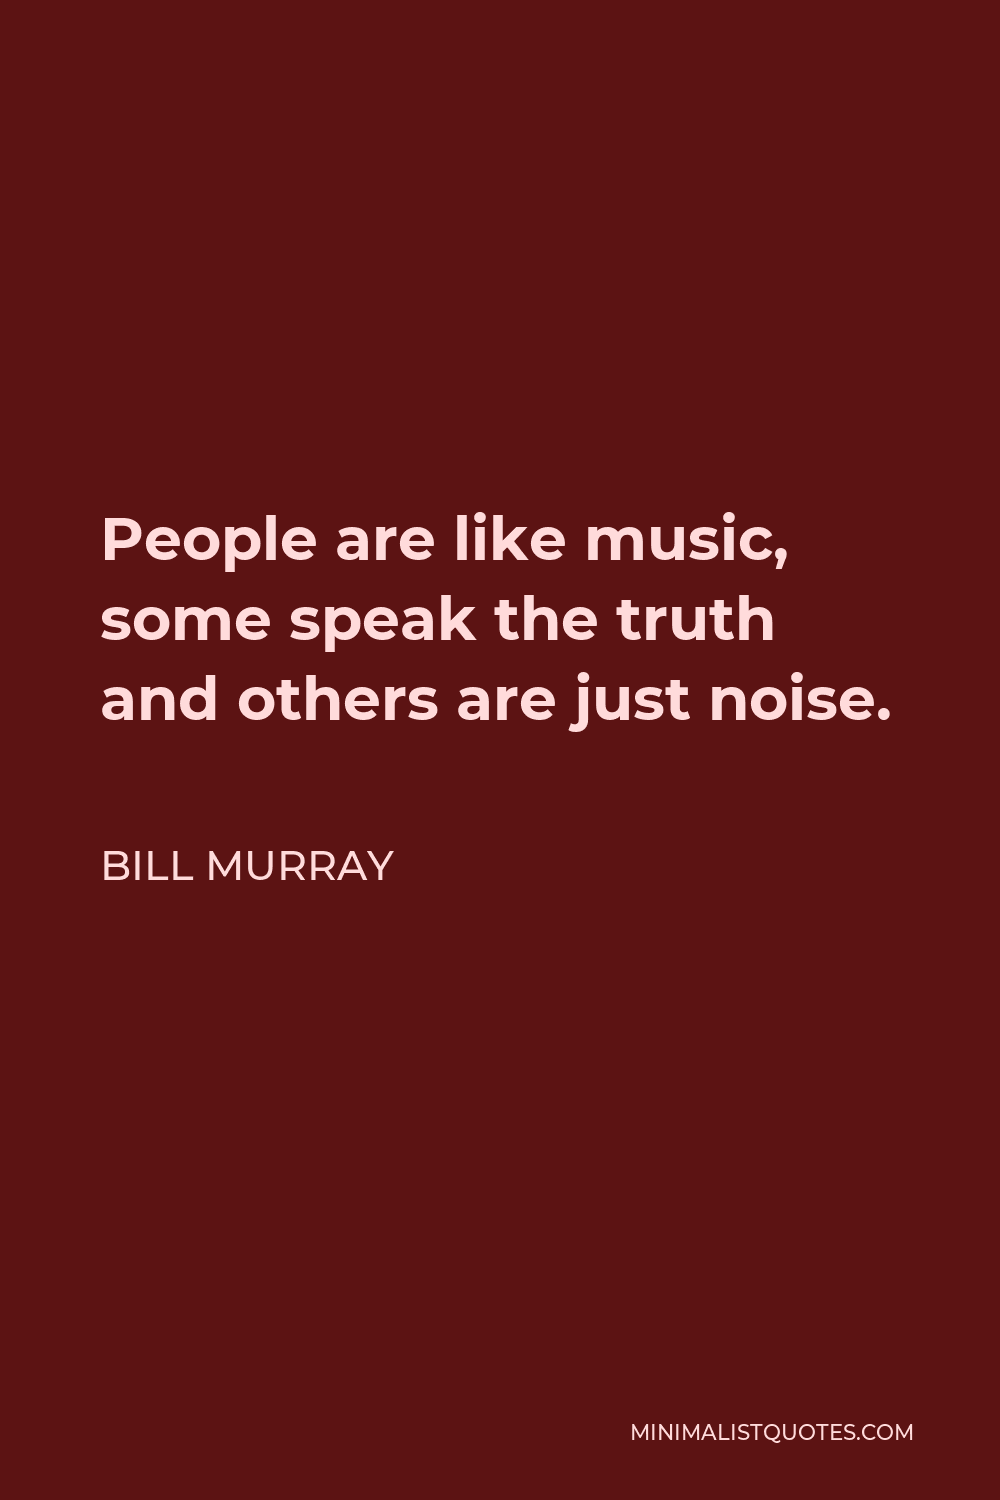 Bill Murray Quote - People are like music, some speak the truth and others are just noise.